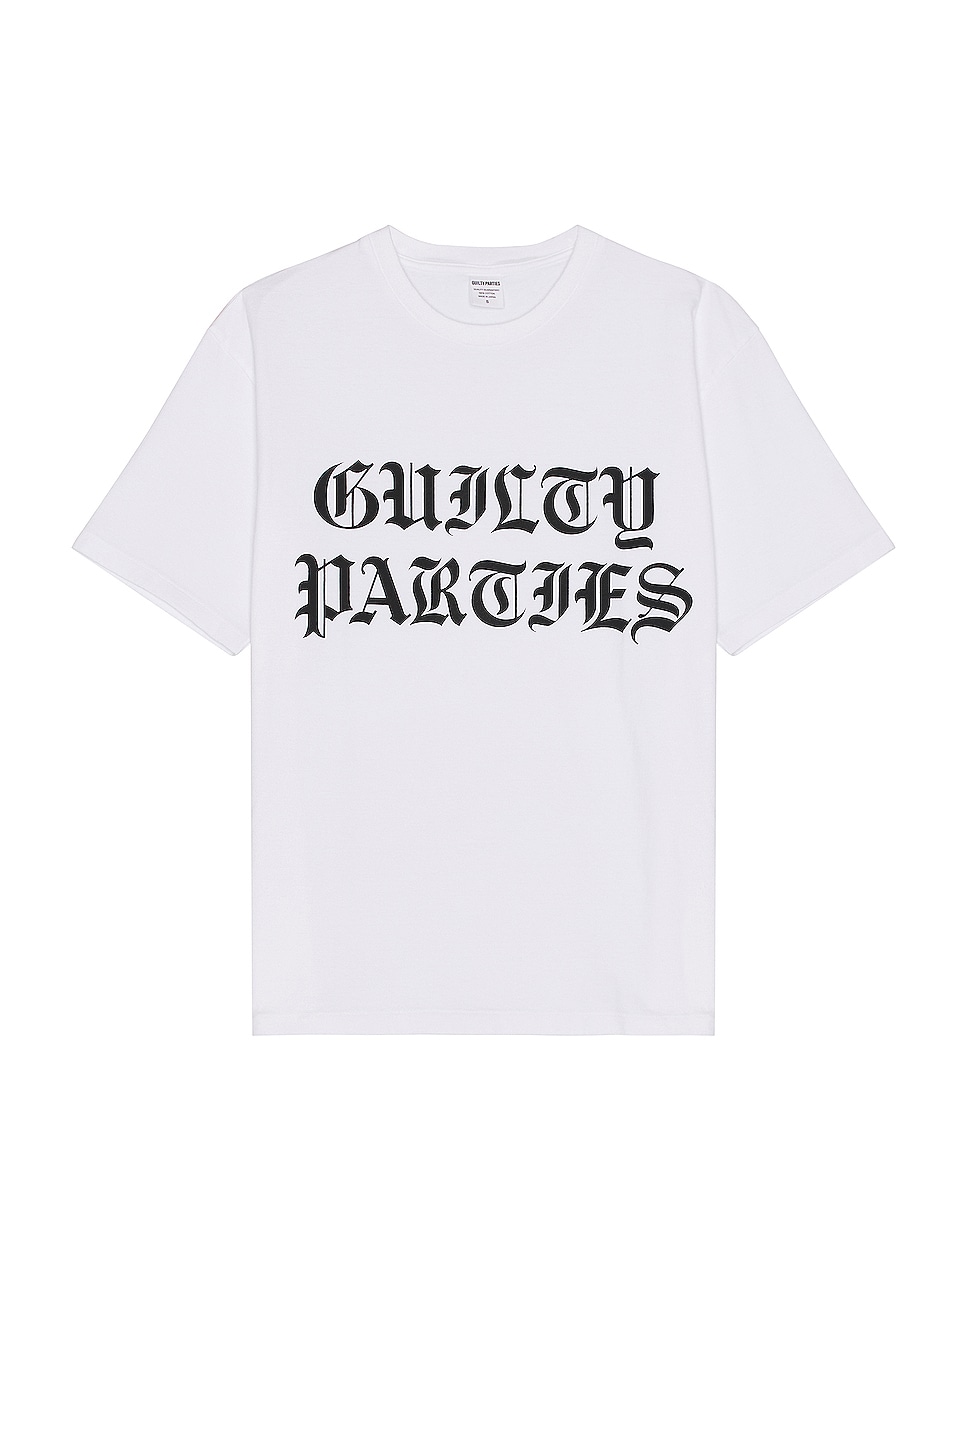 Washed Heavy Weight Crew Neck T-Shirt in White